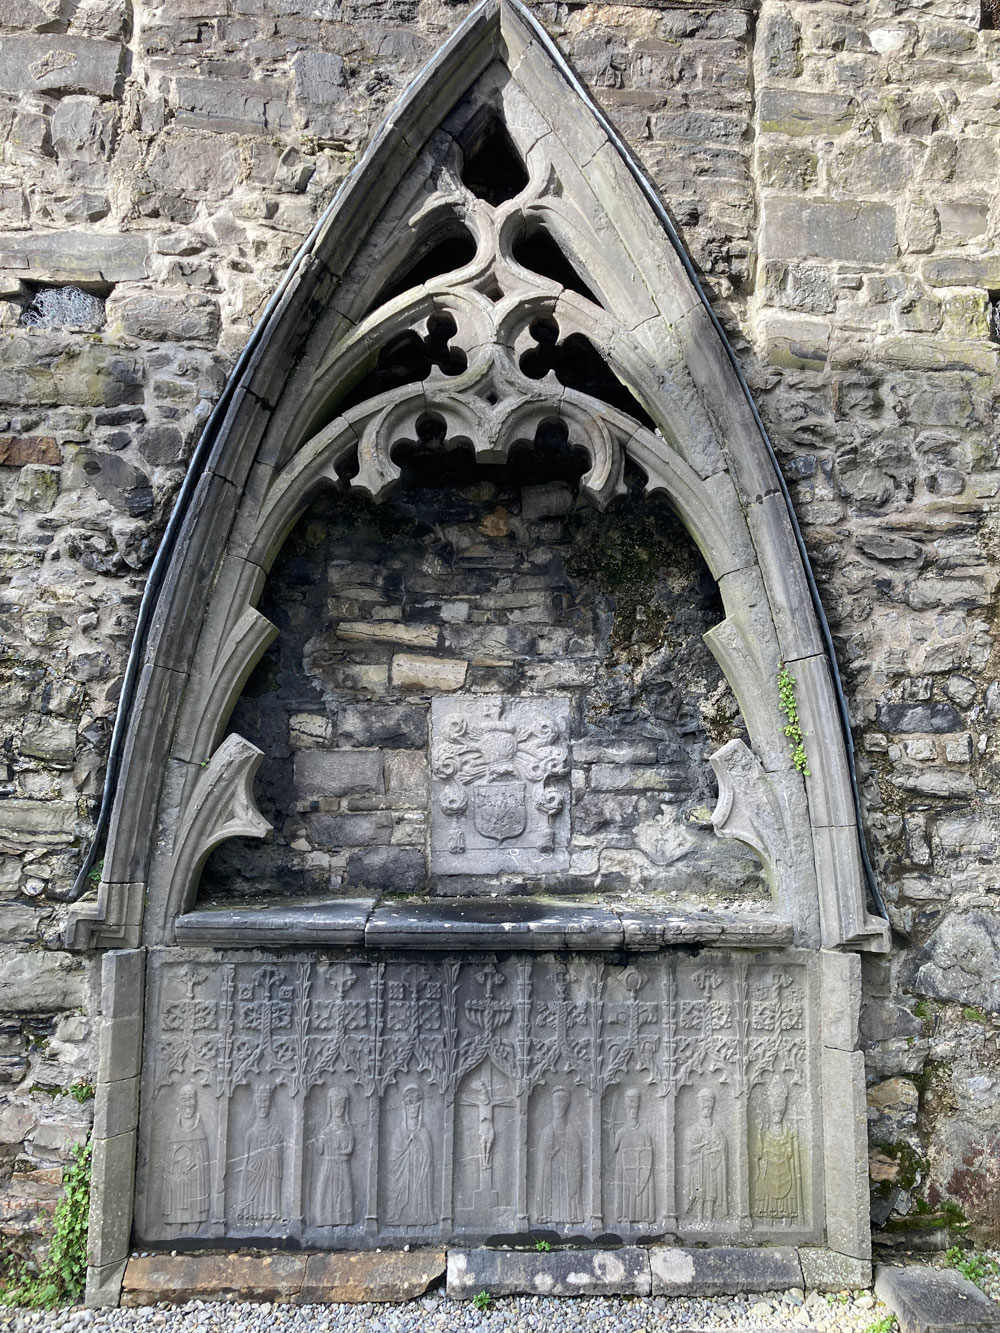 A view of the highly ornate O'Crean Memorial which is the oldest surviving burial in the Abbey, which dates to 1506.